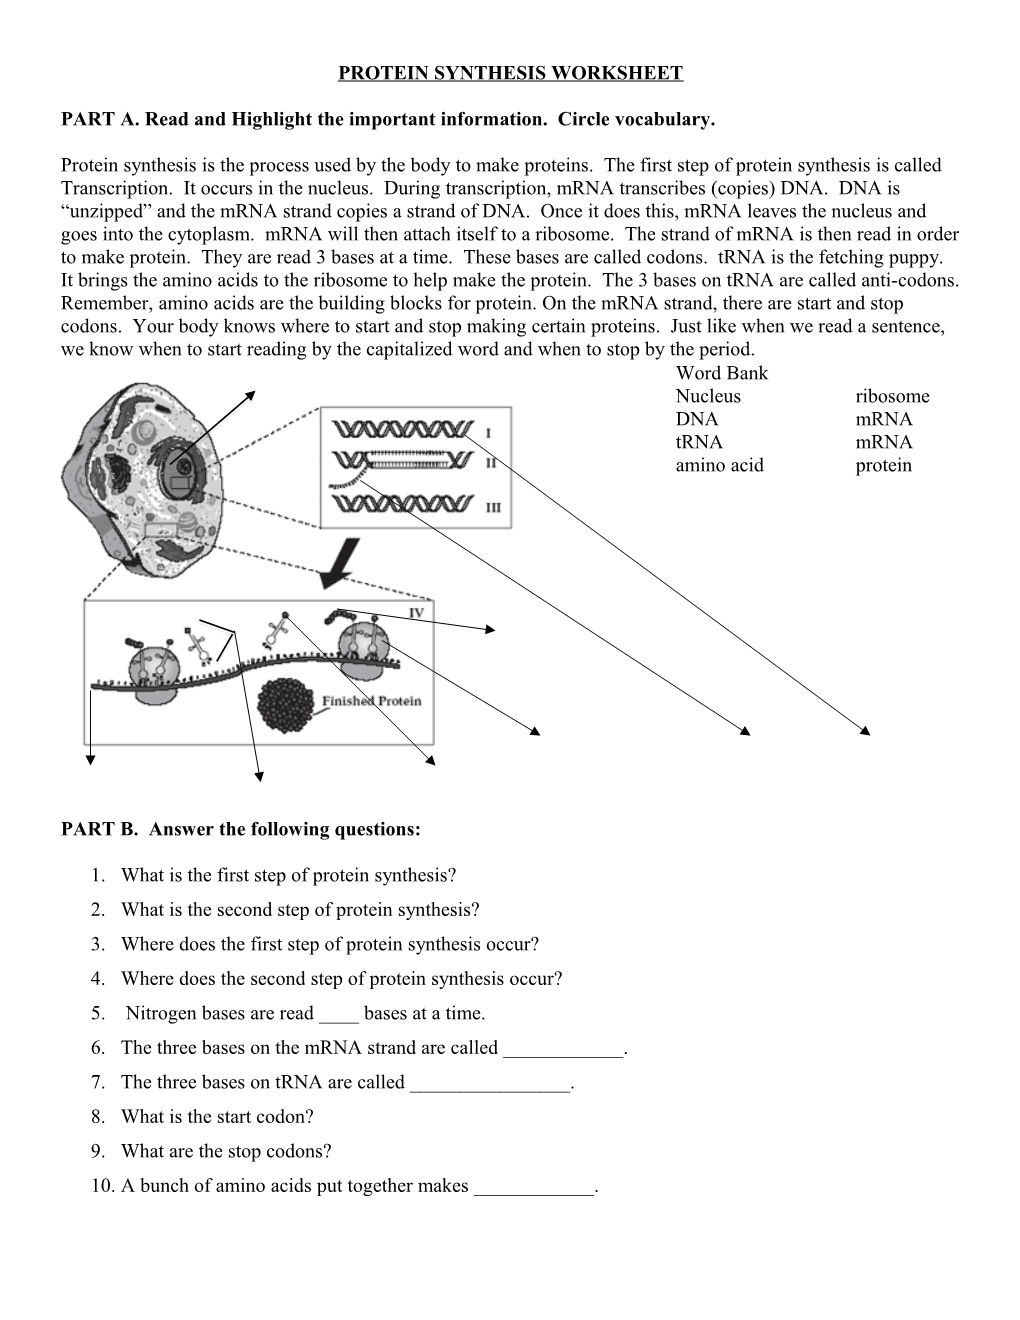 Protein Synthesis Worksheet s2